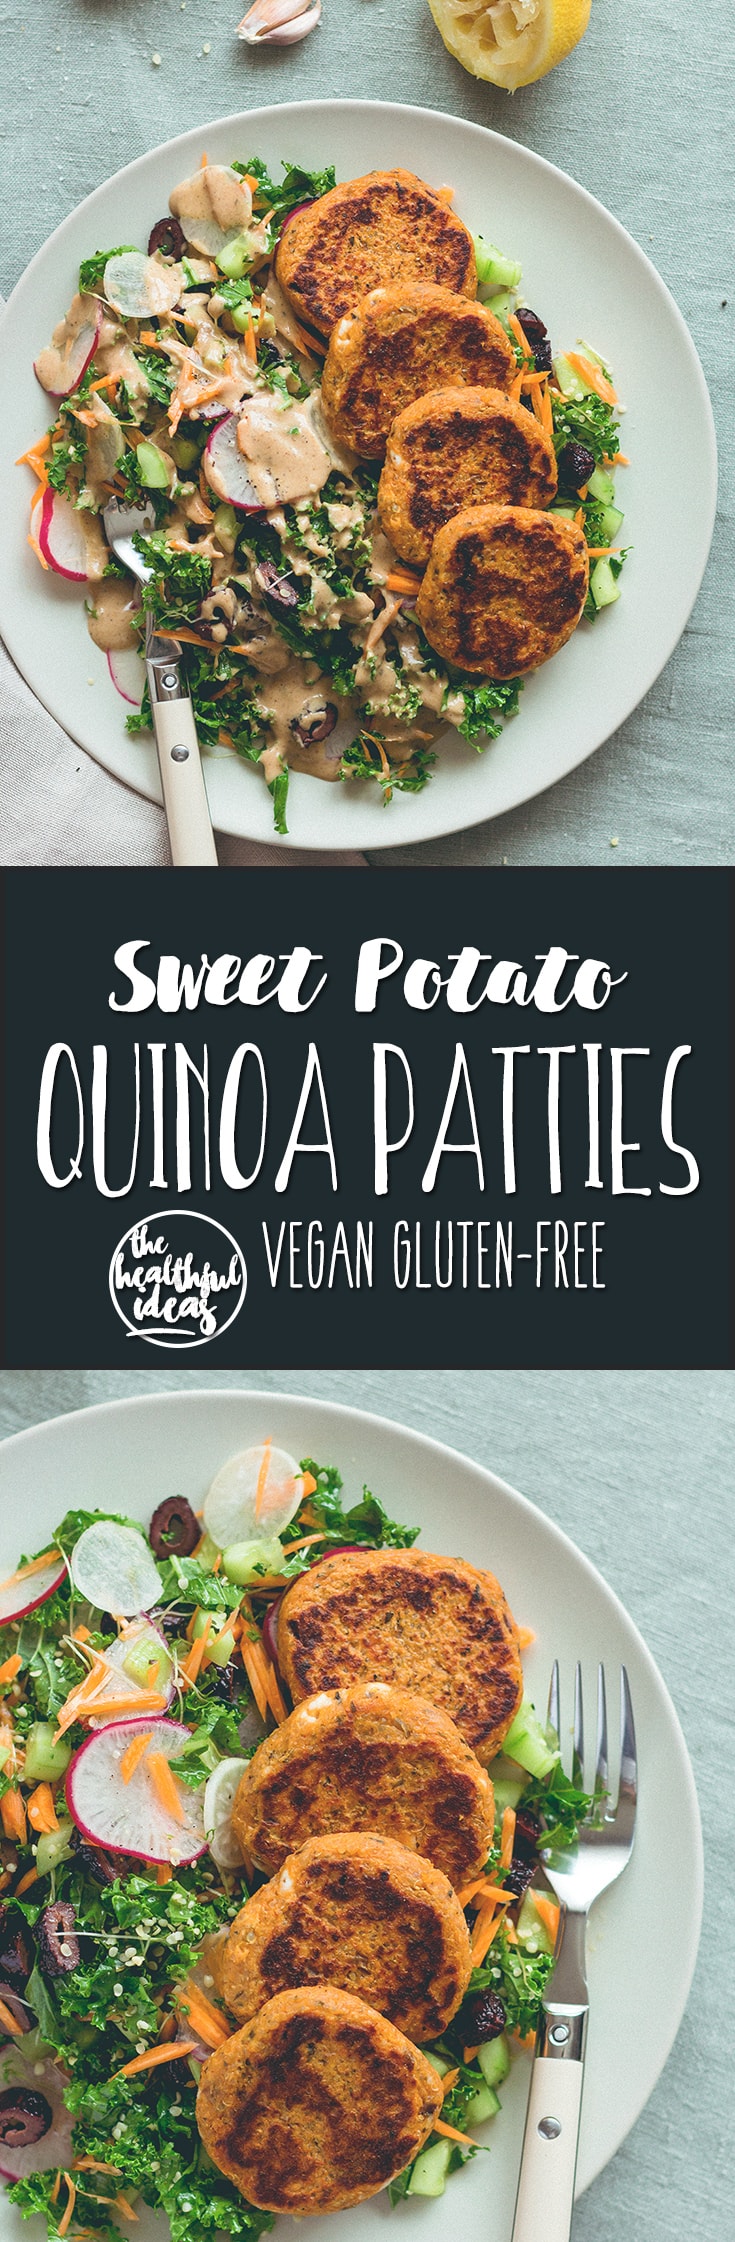 Sweet Potato Quinoa Patties with mixed salad and tahini dressing. This recipe is vegan, gluten-free, and totally amazing! You'll love it. | thehealthfulideas.com